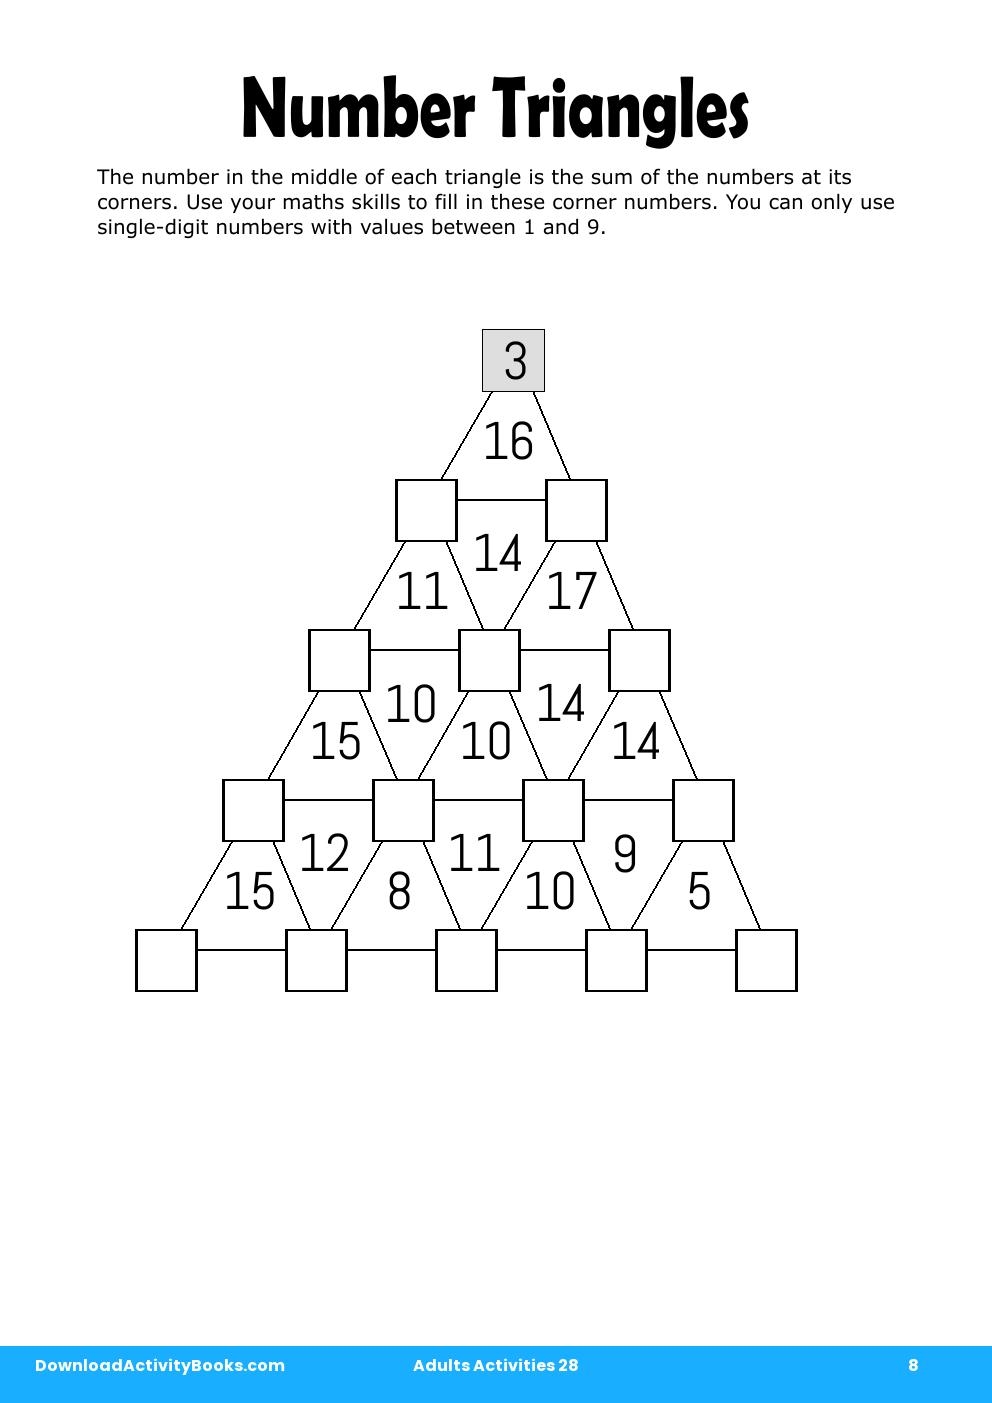 Number Triangles in Adults Activities 28